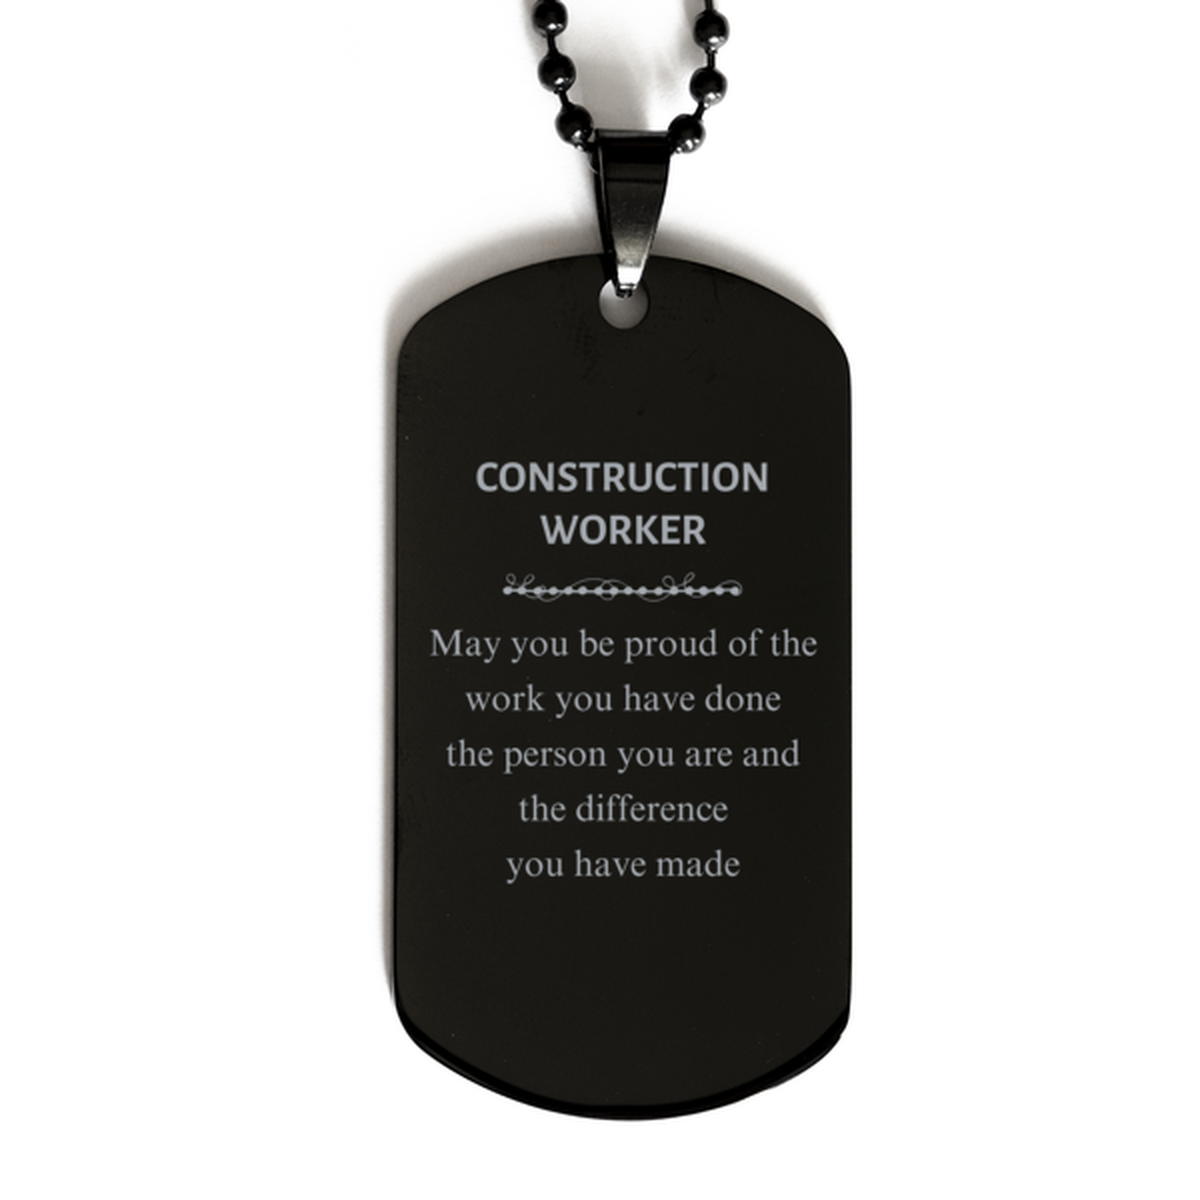 Construction Worker May you be proud of the work you have done, Retirement Construction Worker Black Dog Tag for Colleague Appreciation Gifts Amazing for Construction Worker